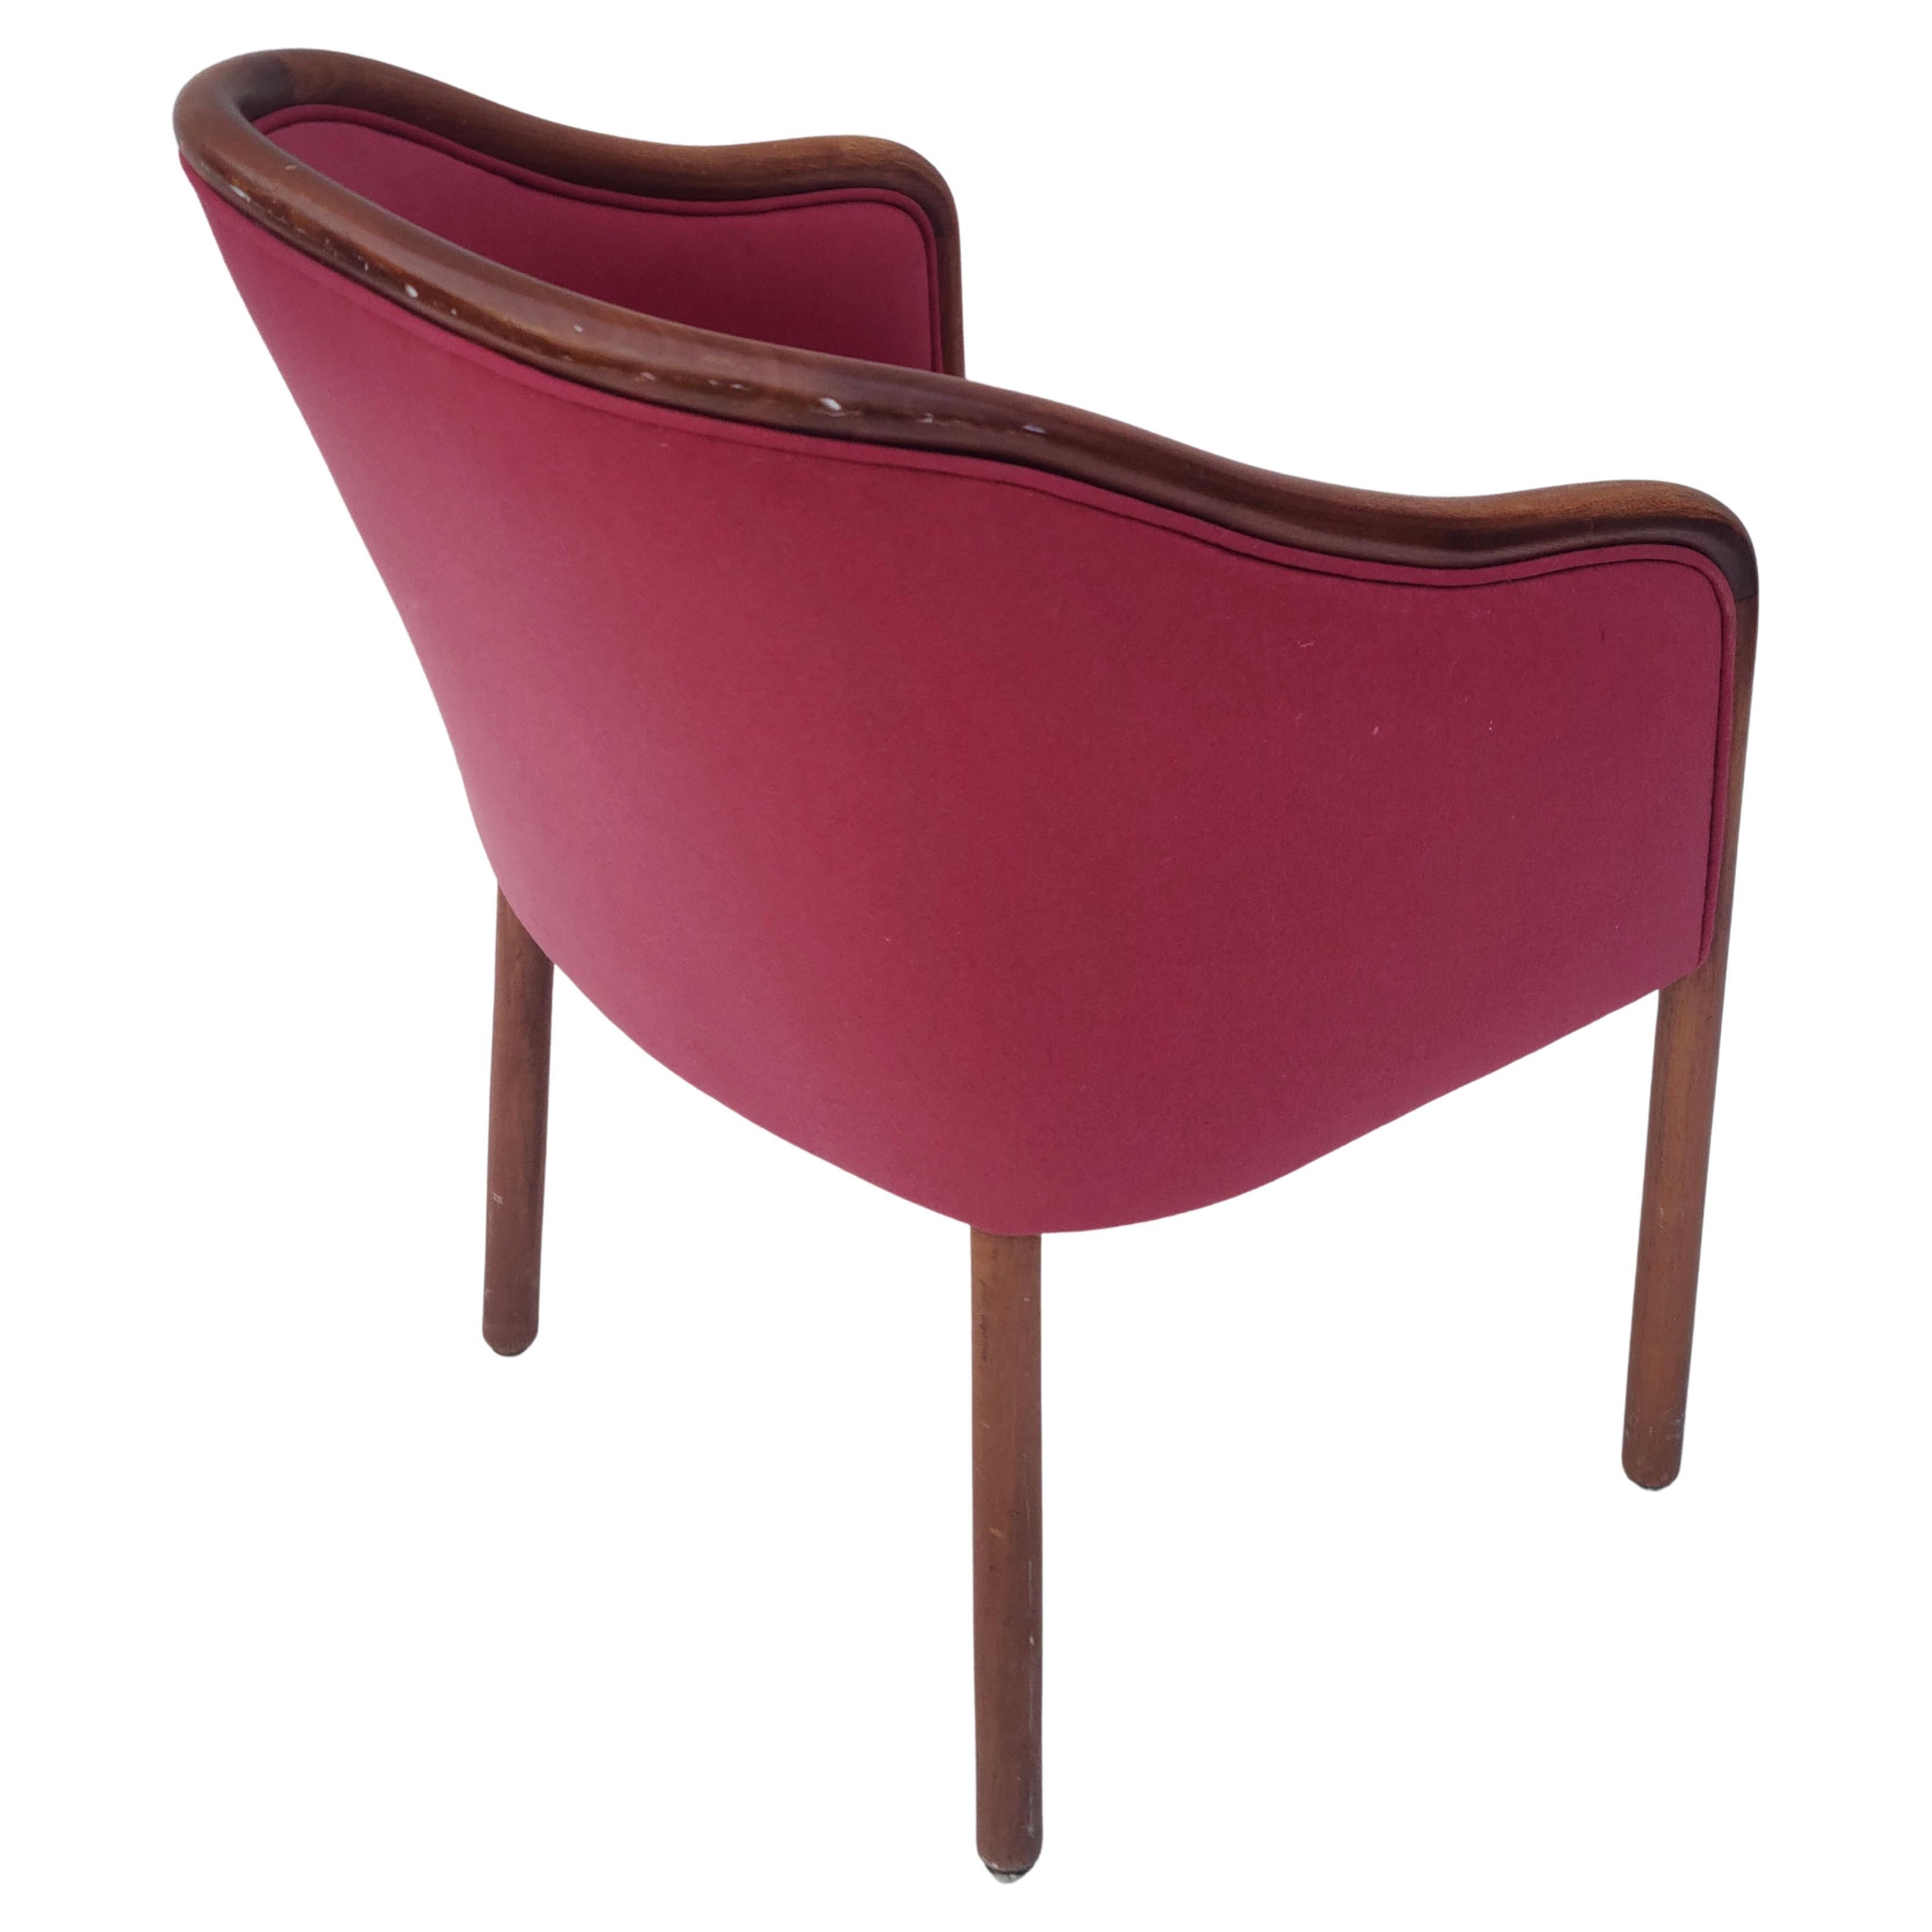 Please feel free to reach out for accurate shipping to your location.

Sculpted Walnut Armchair.
Designed by Ward Bennett for Brickel Associates.
Rose fabric appears to be original, has tears.
For restoration.
